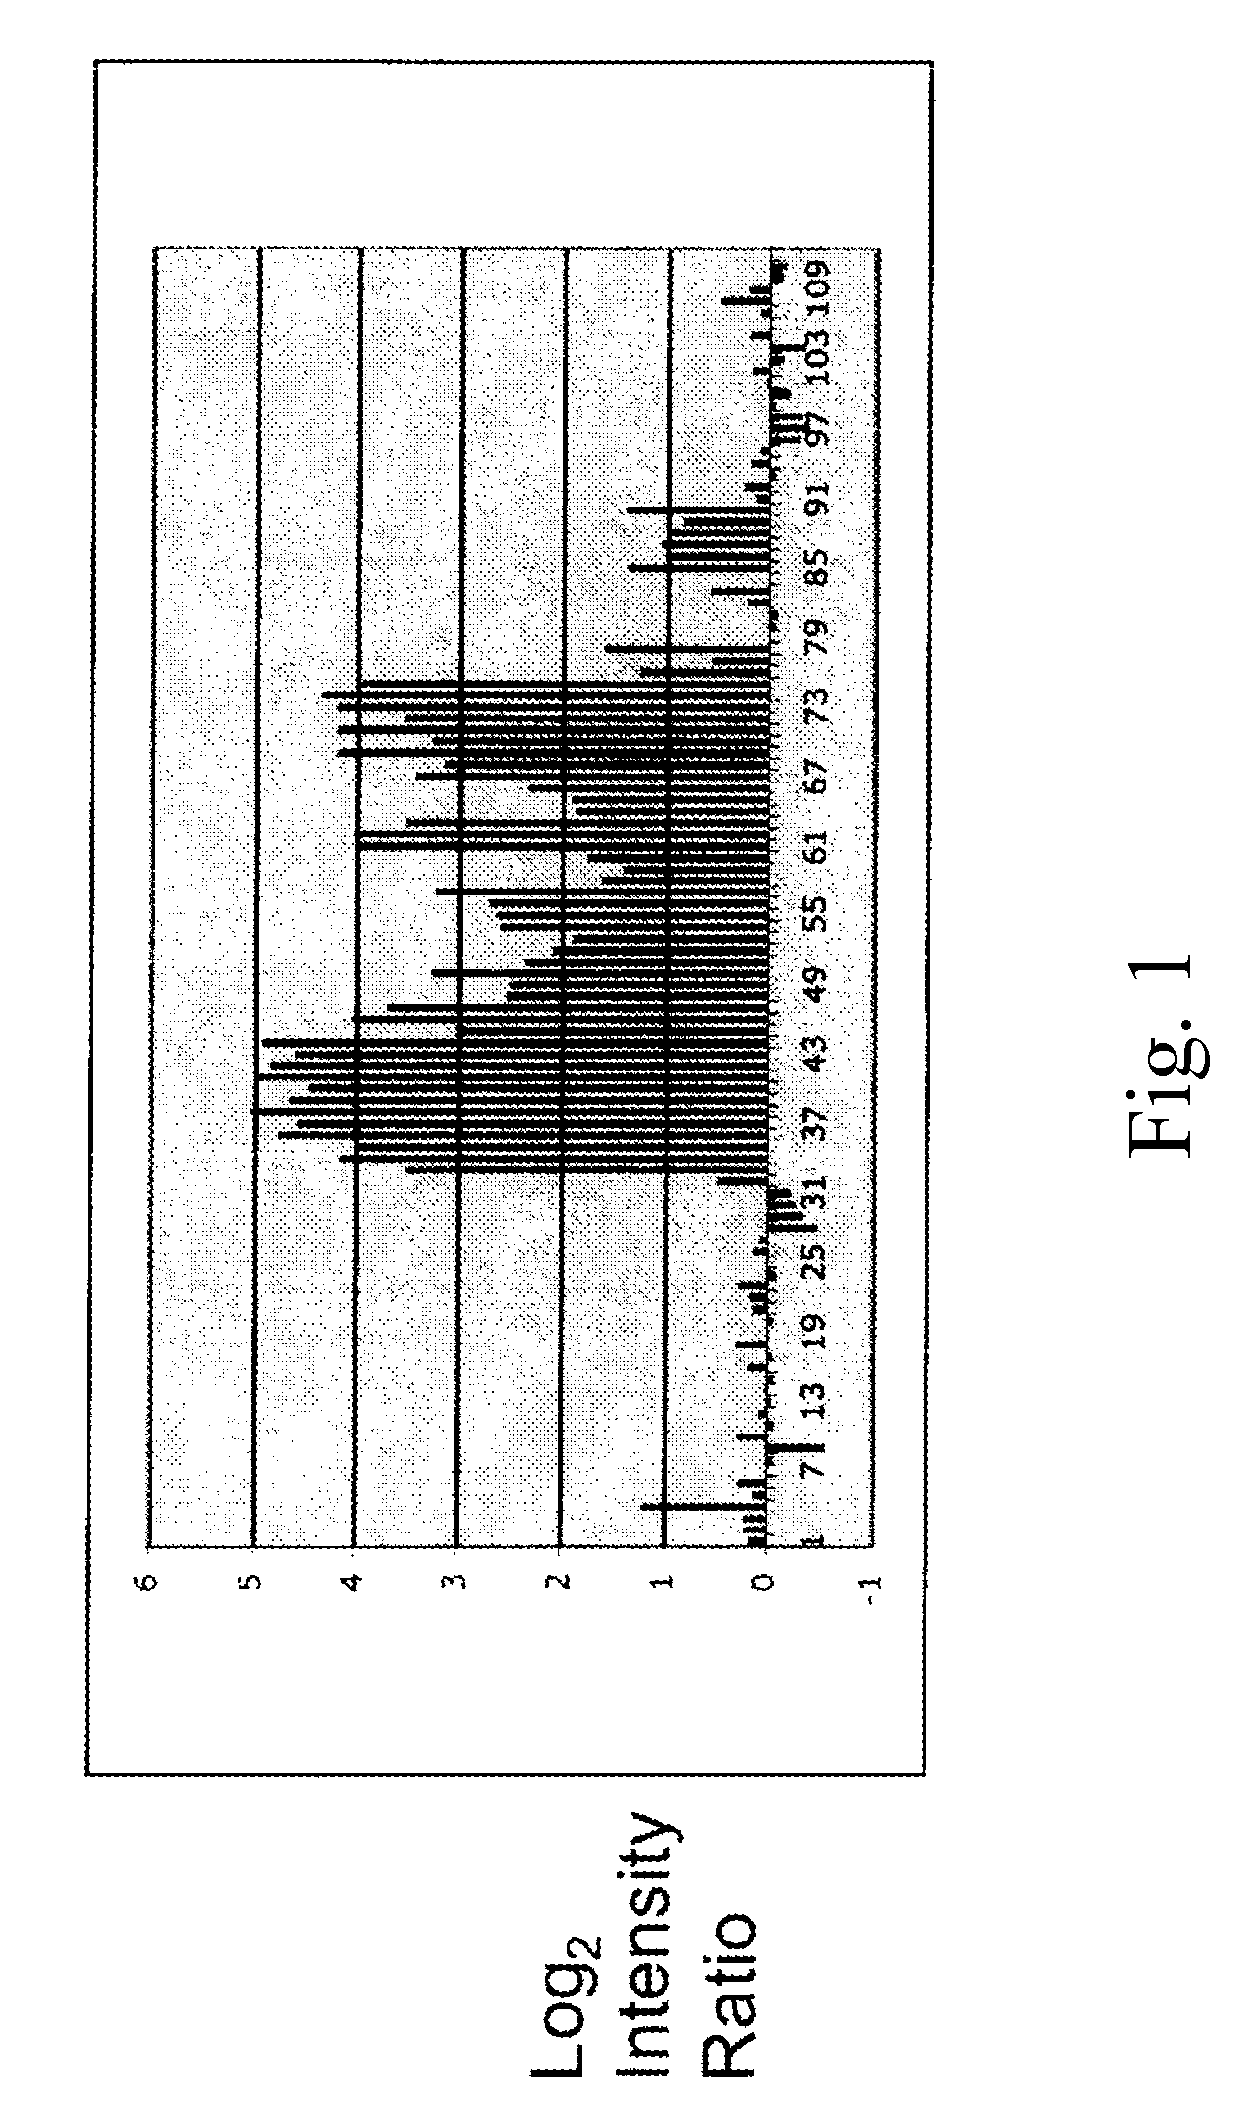 Specific amplification of tumor specific DNA sequences